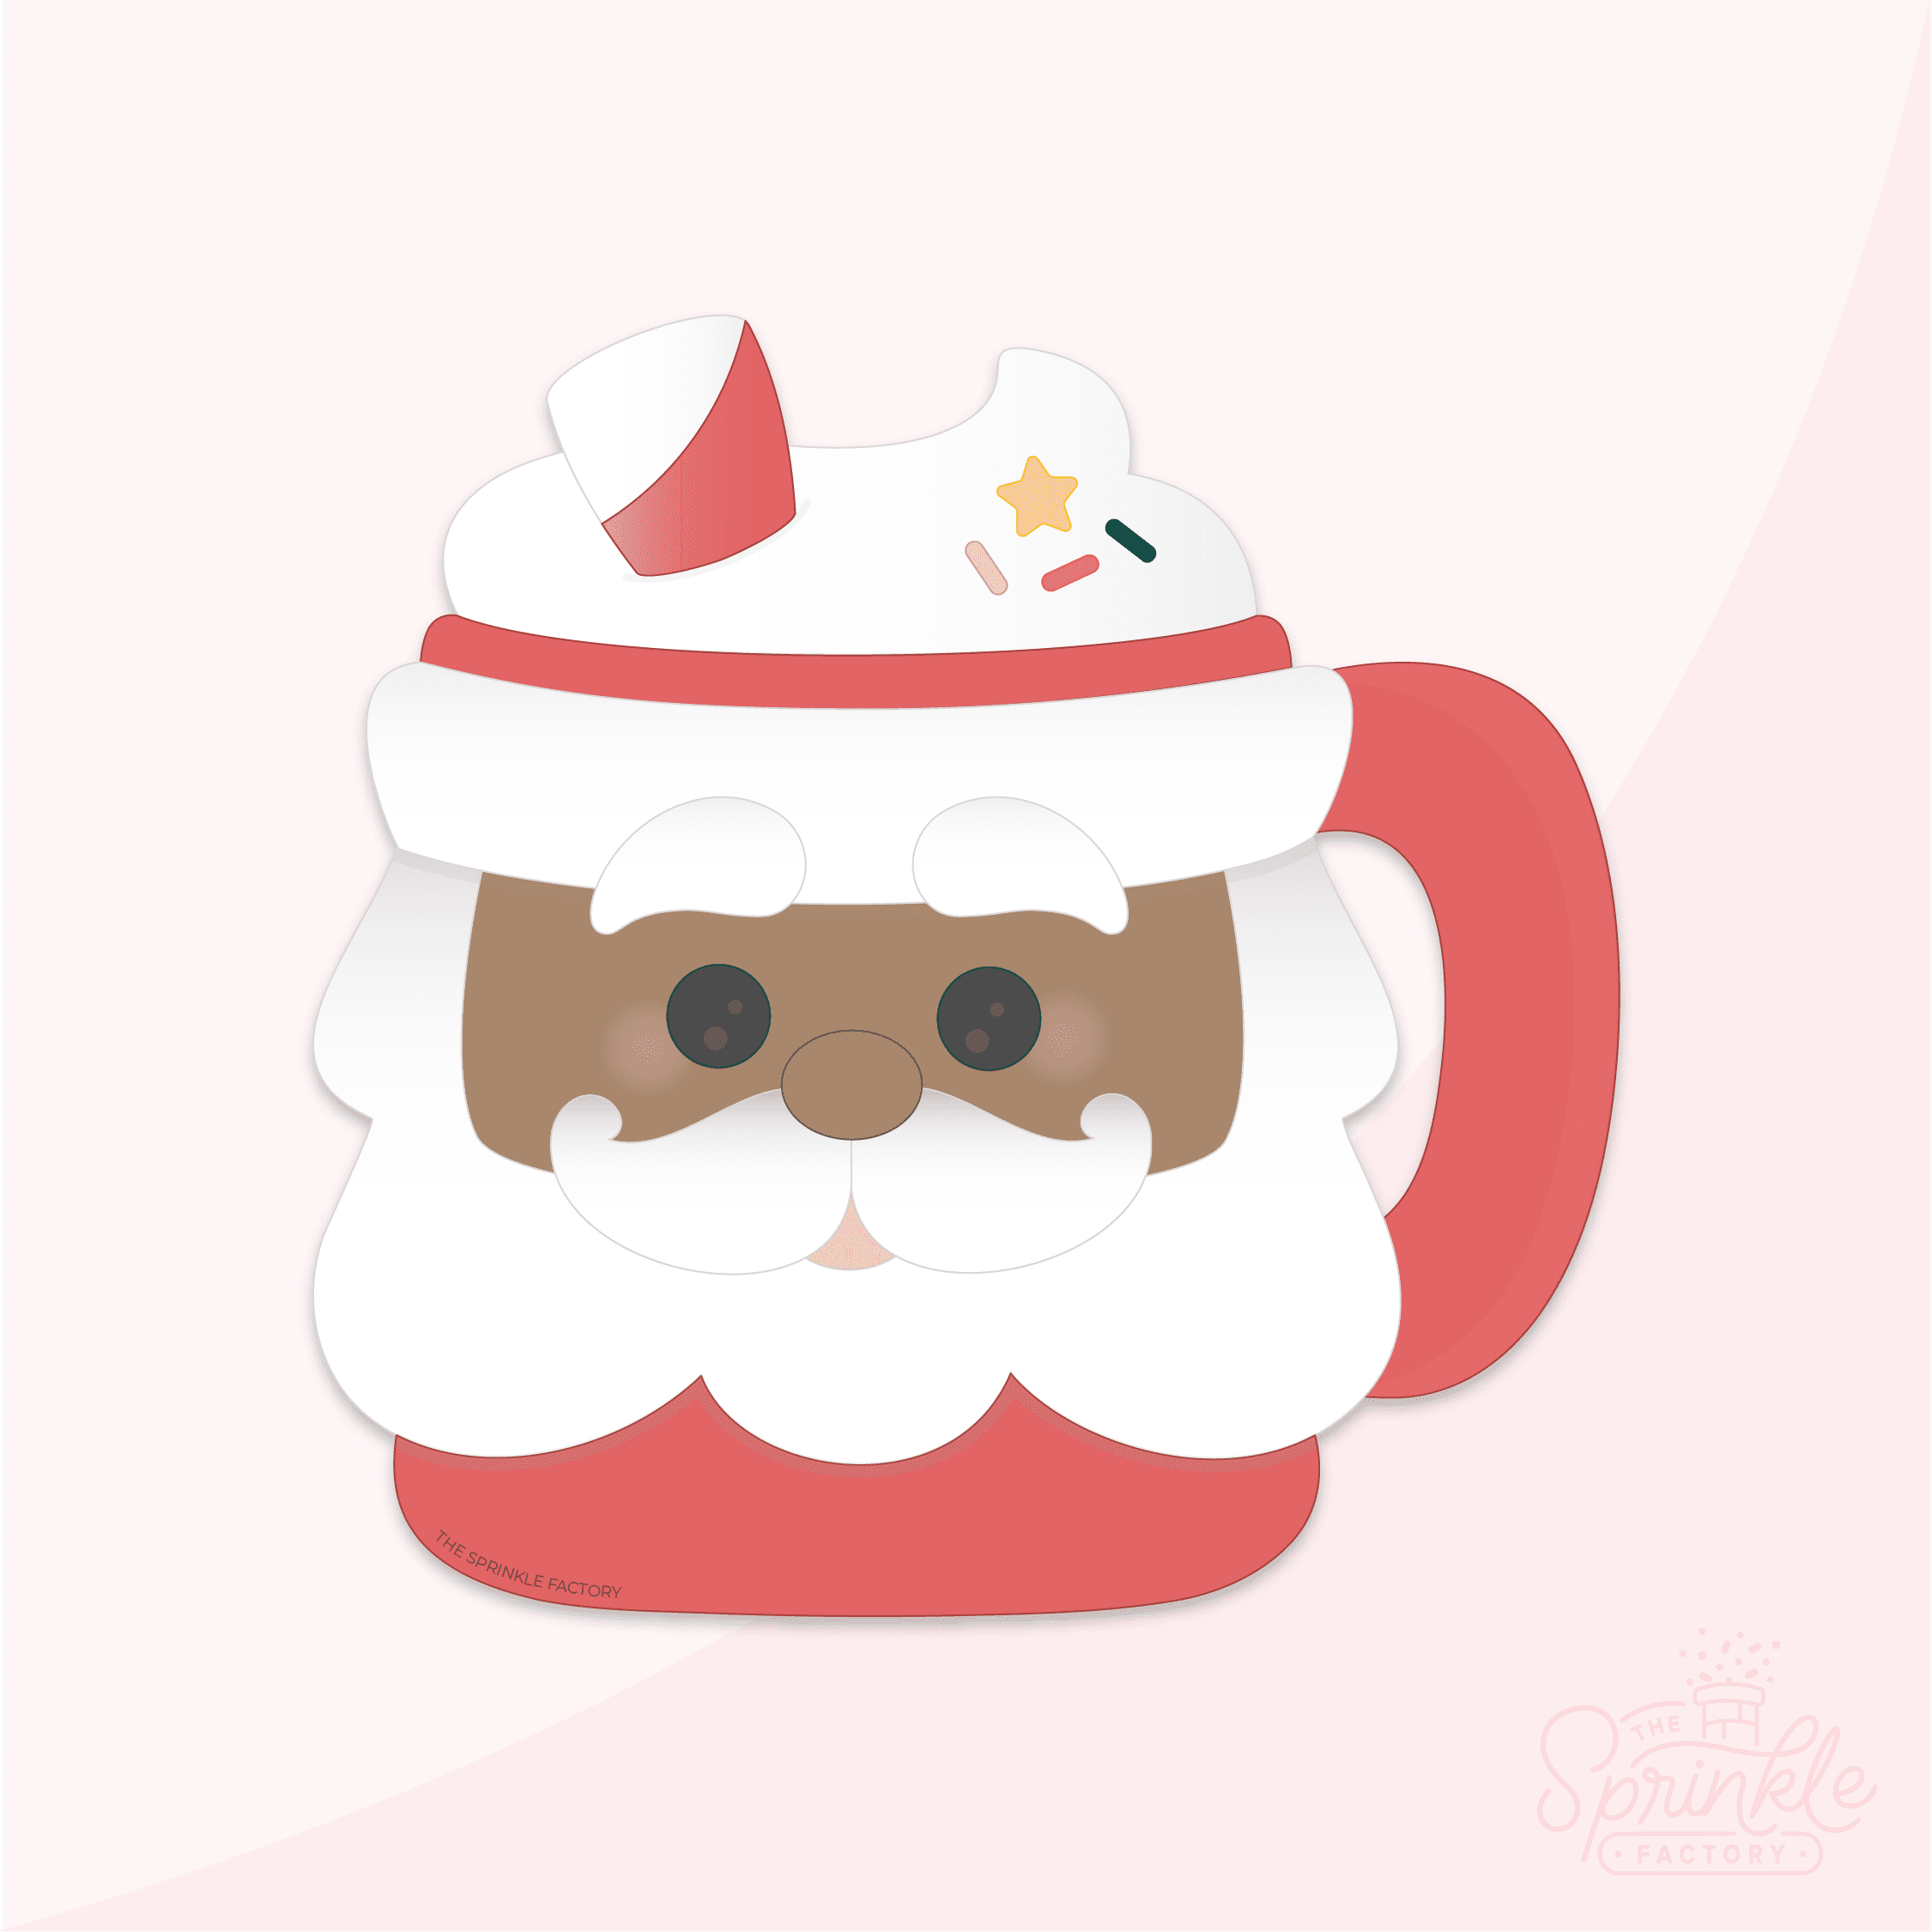 Clipart of a Santa face on a red mug with red and white straw and whipped cream.